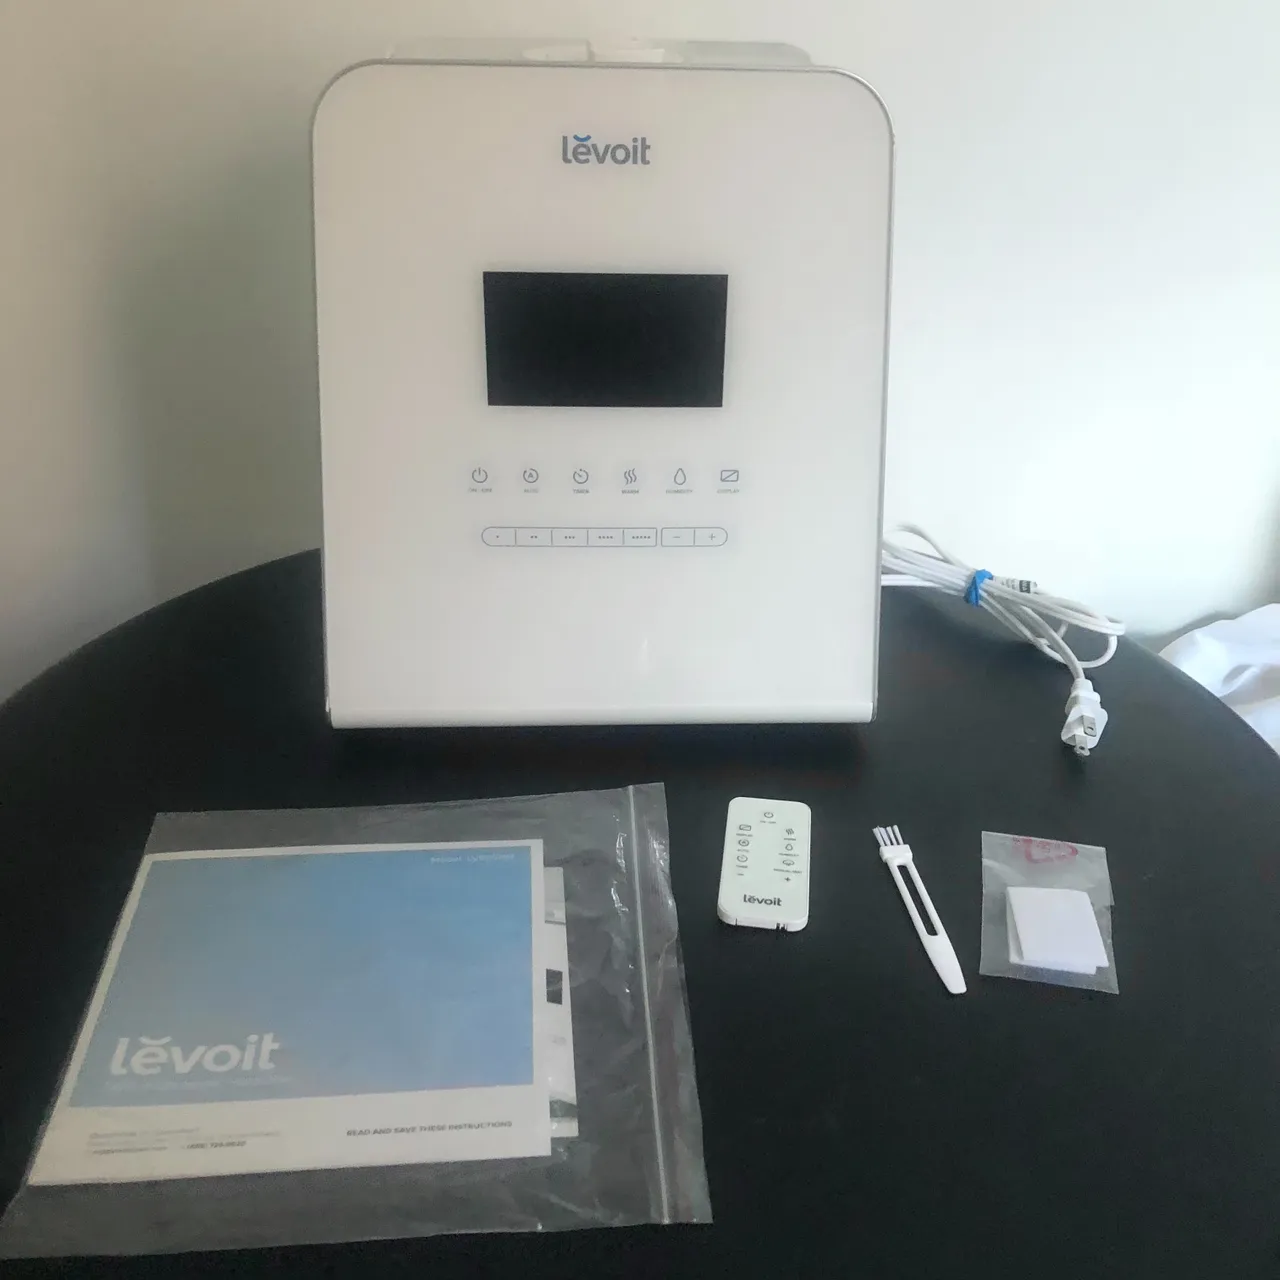 Levoit 5.5L Humidifier with Touchscreen and Remote Control photo 1